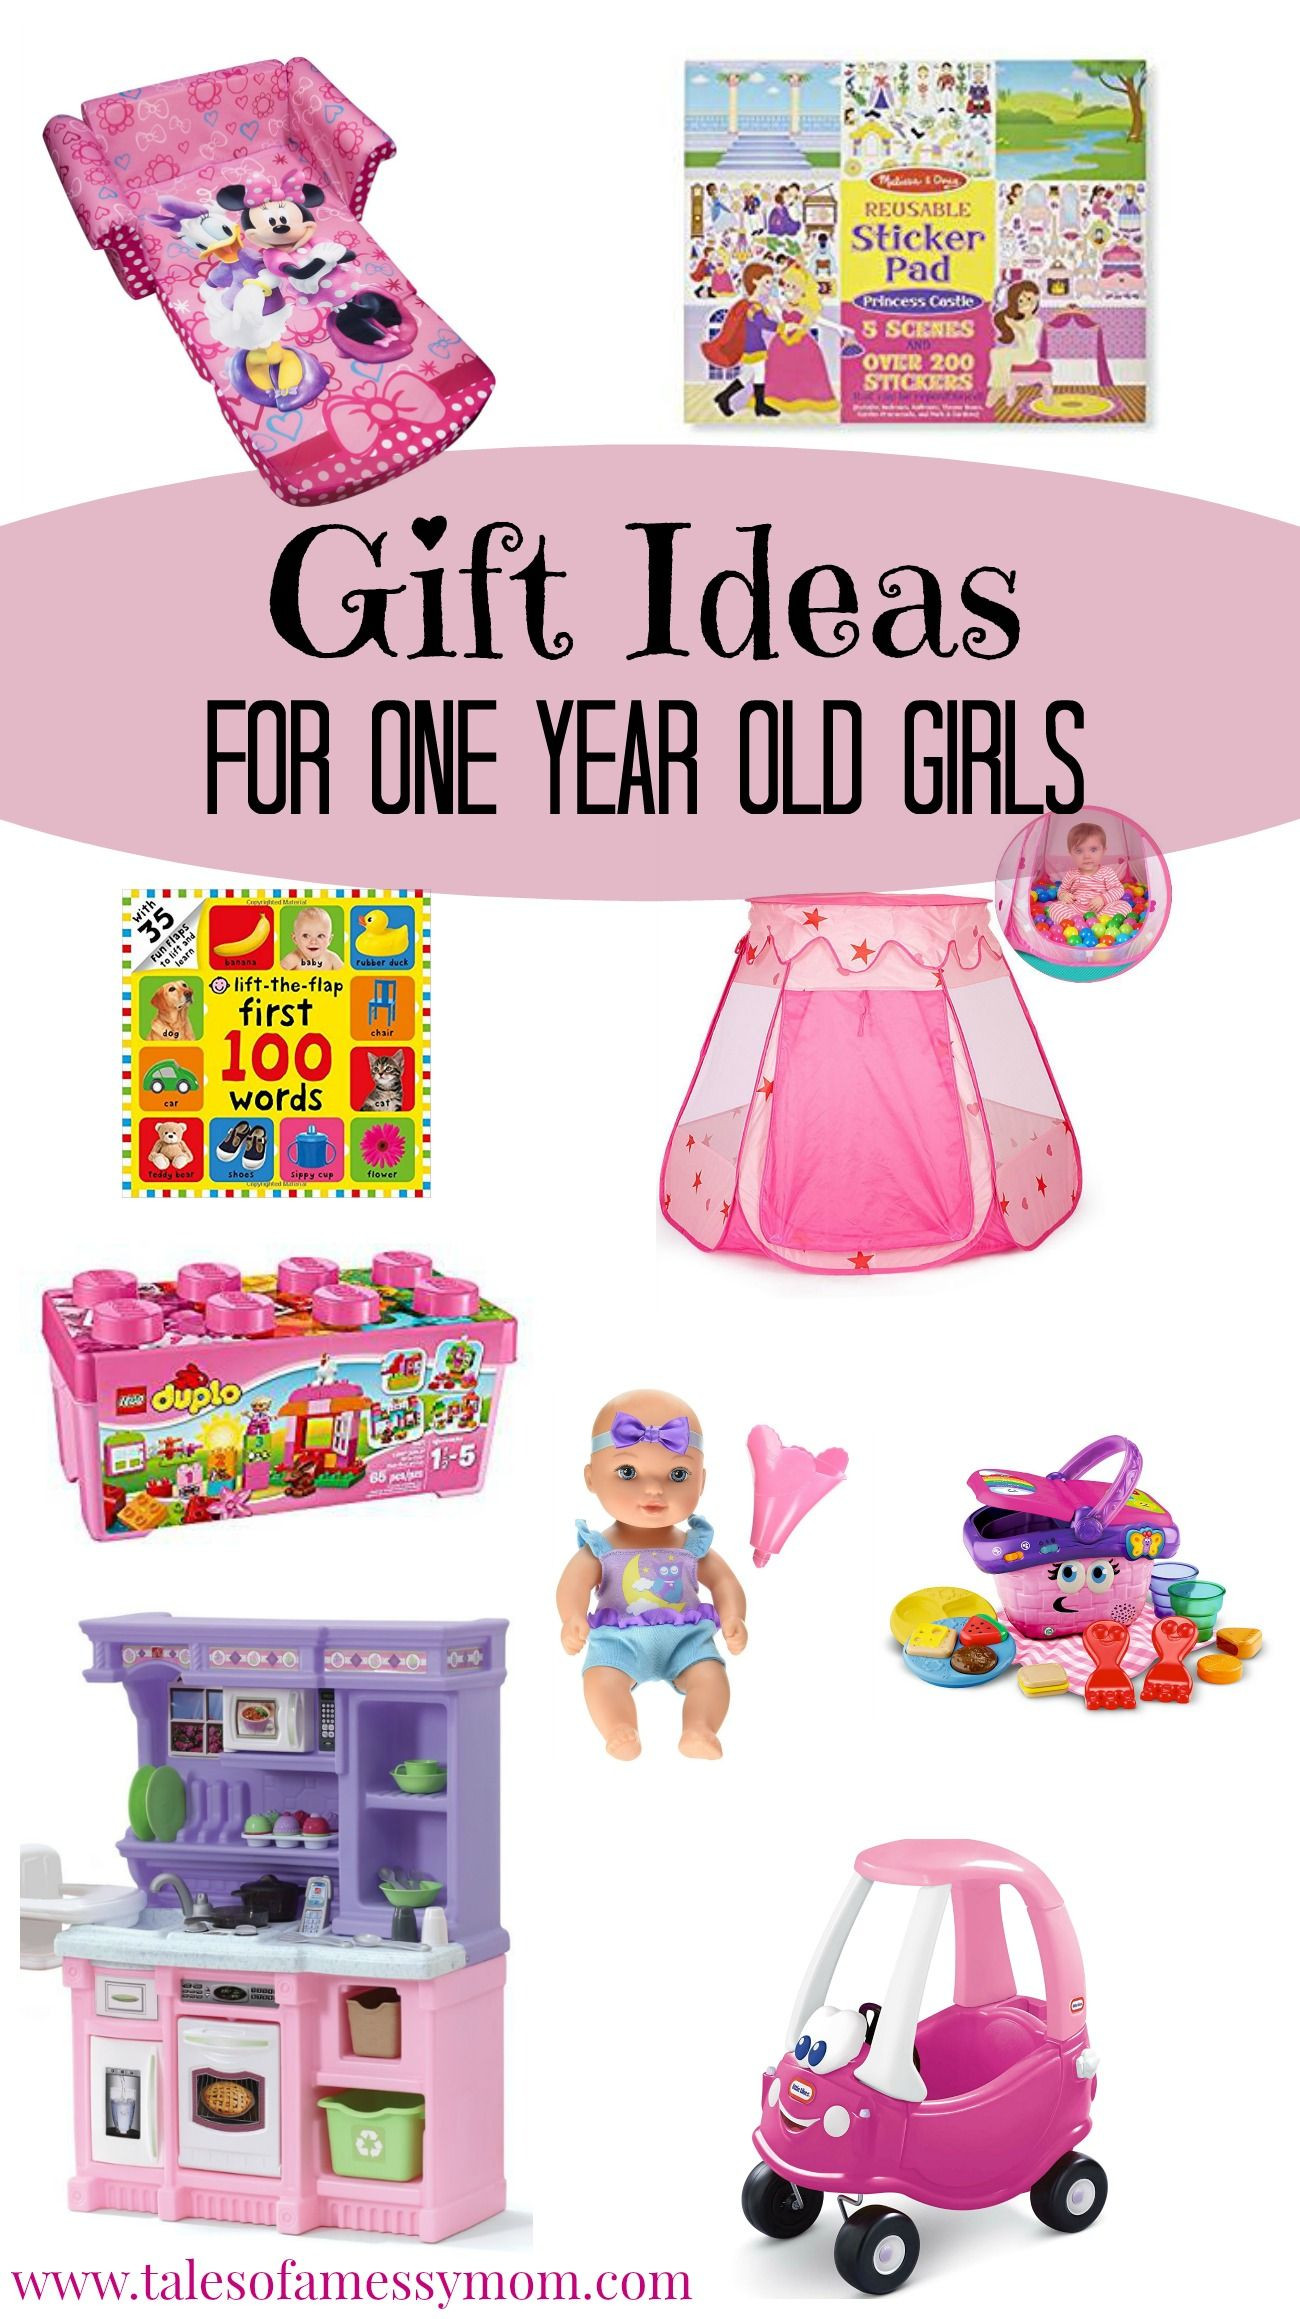 Birthday Gift Ideas For One Year Old Girl
 Gift Ideas for e Year Old Girls